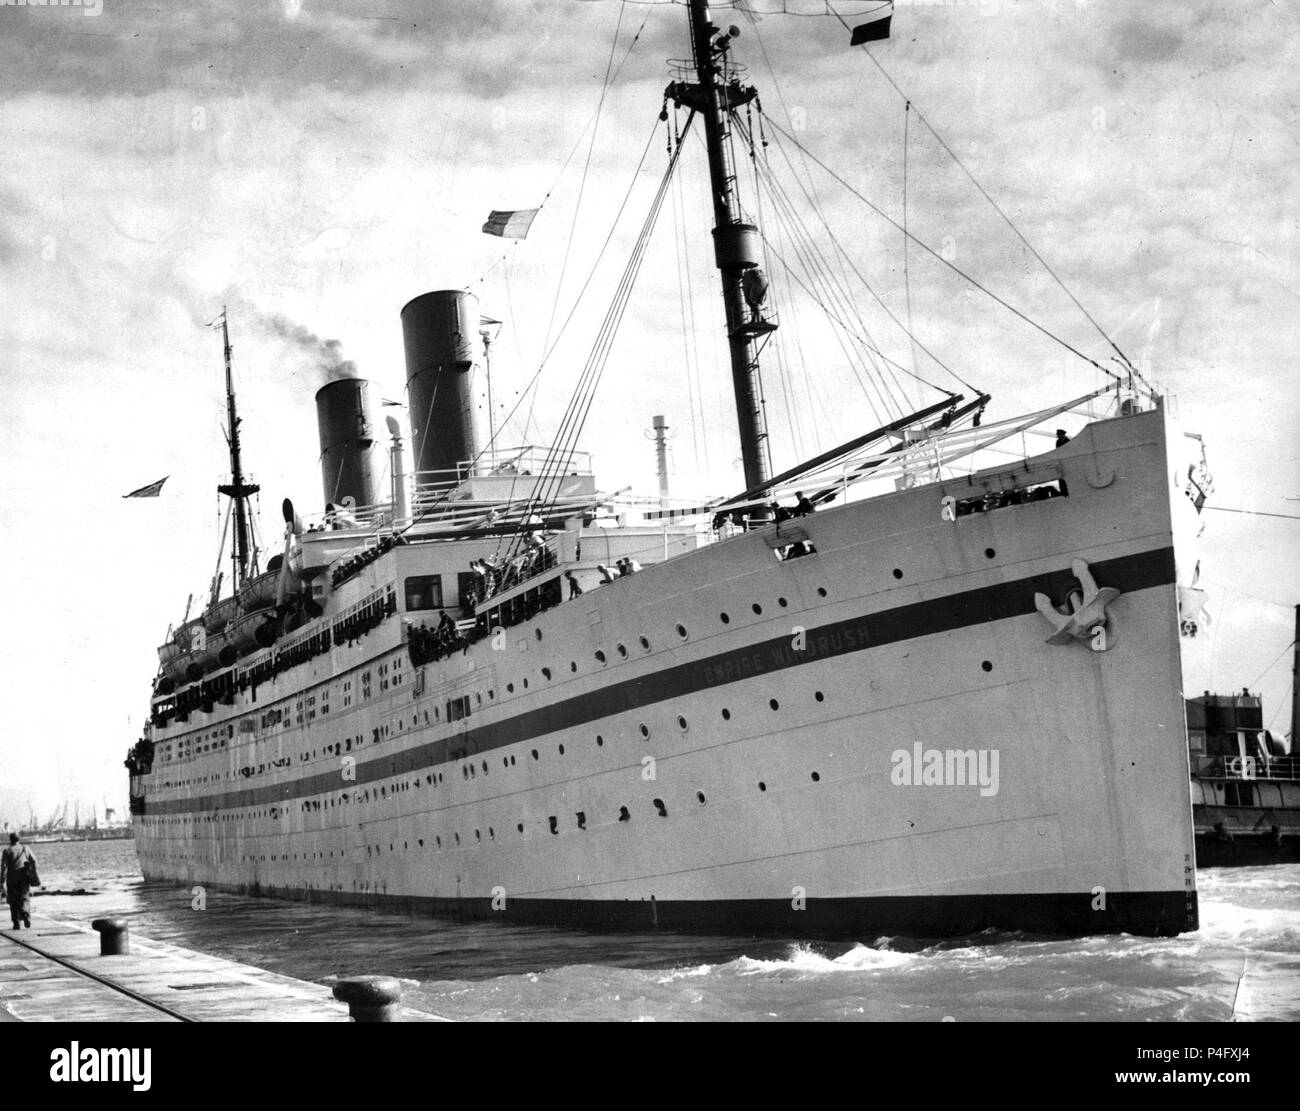 File photo dated 28/03/54 of the 14,651 ton British troopship, The "Empire Windrush". Theresa May, who has faced criticism, is expected to attend a Westminster Abbey service on Friday to mark the moment hundreds of Caribbean migrants departed the Empire Windrush ship in Tilbury Docks on June 22 1948. Stock Photo